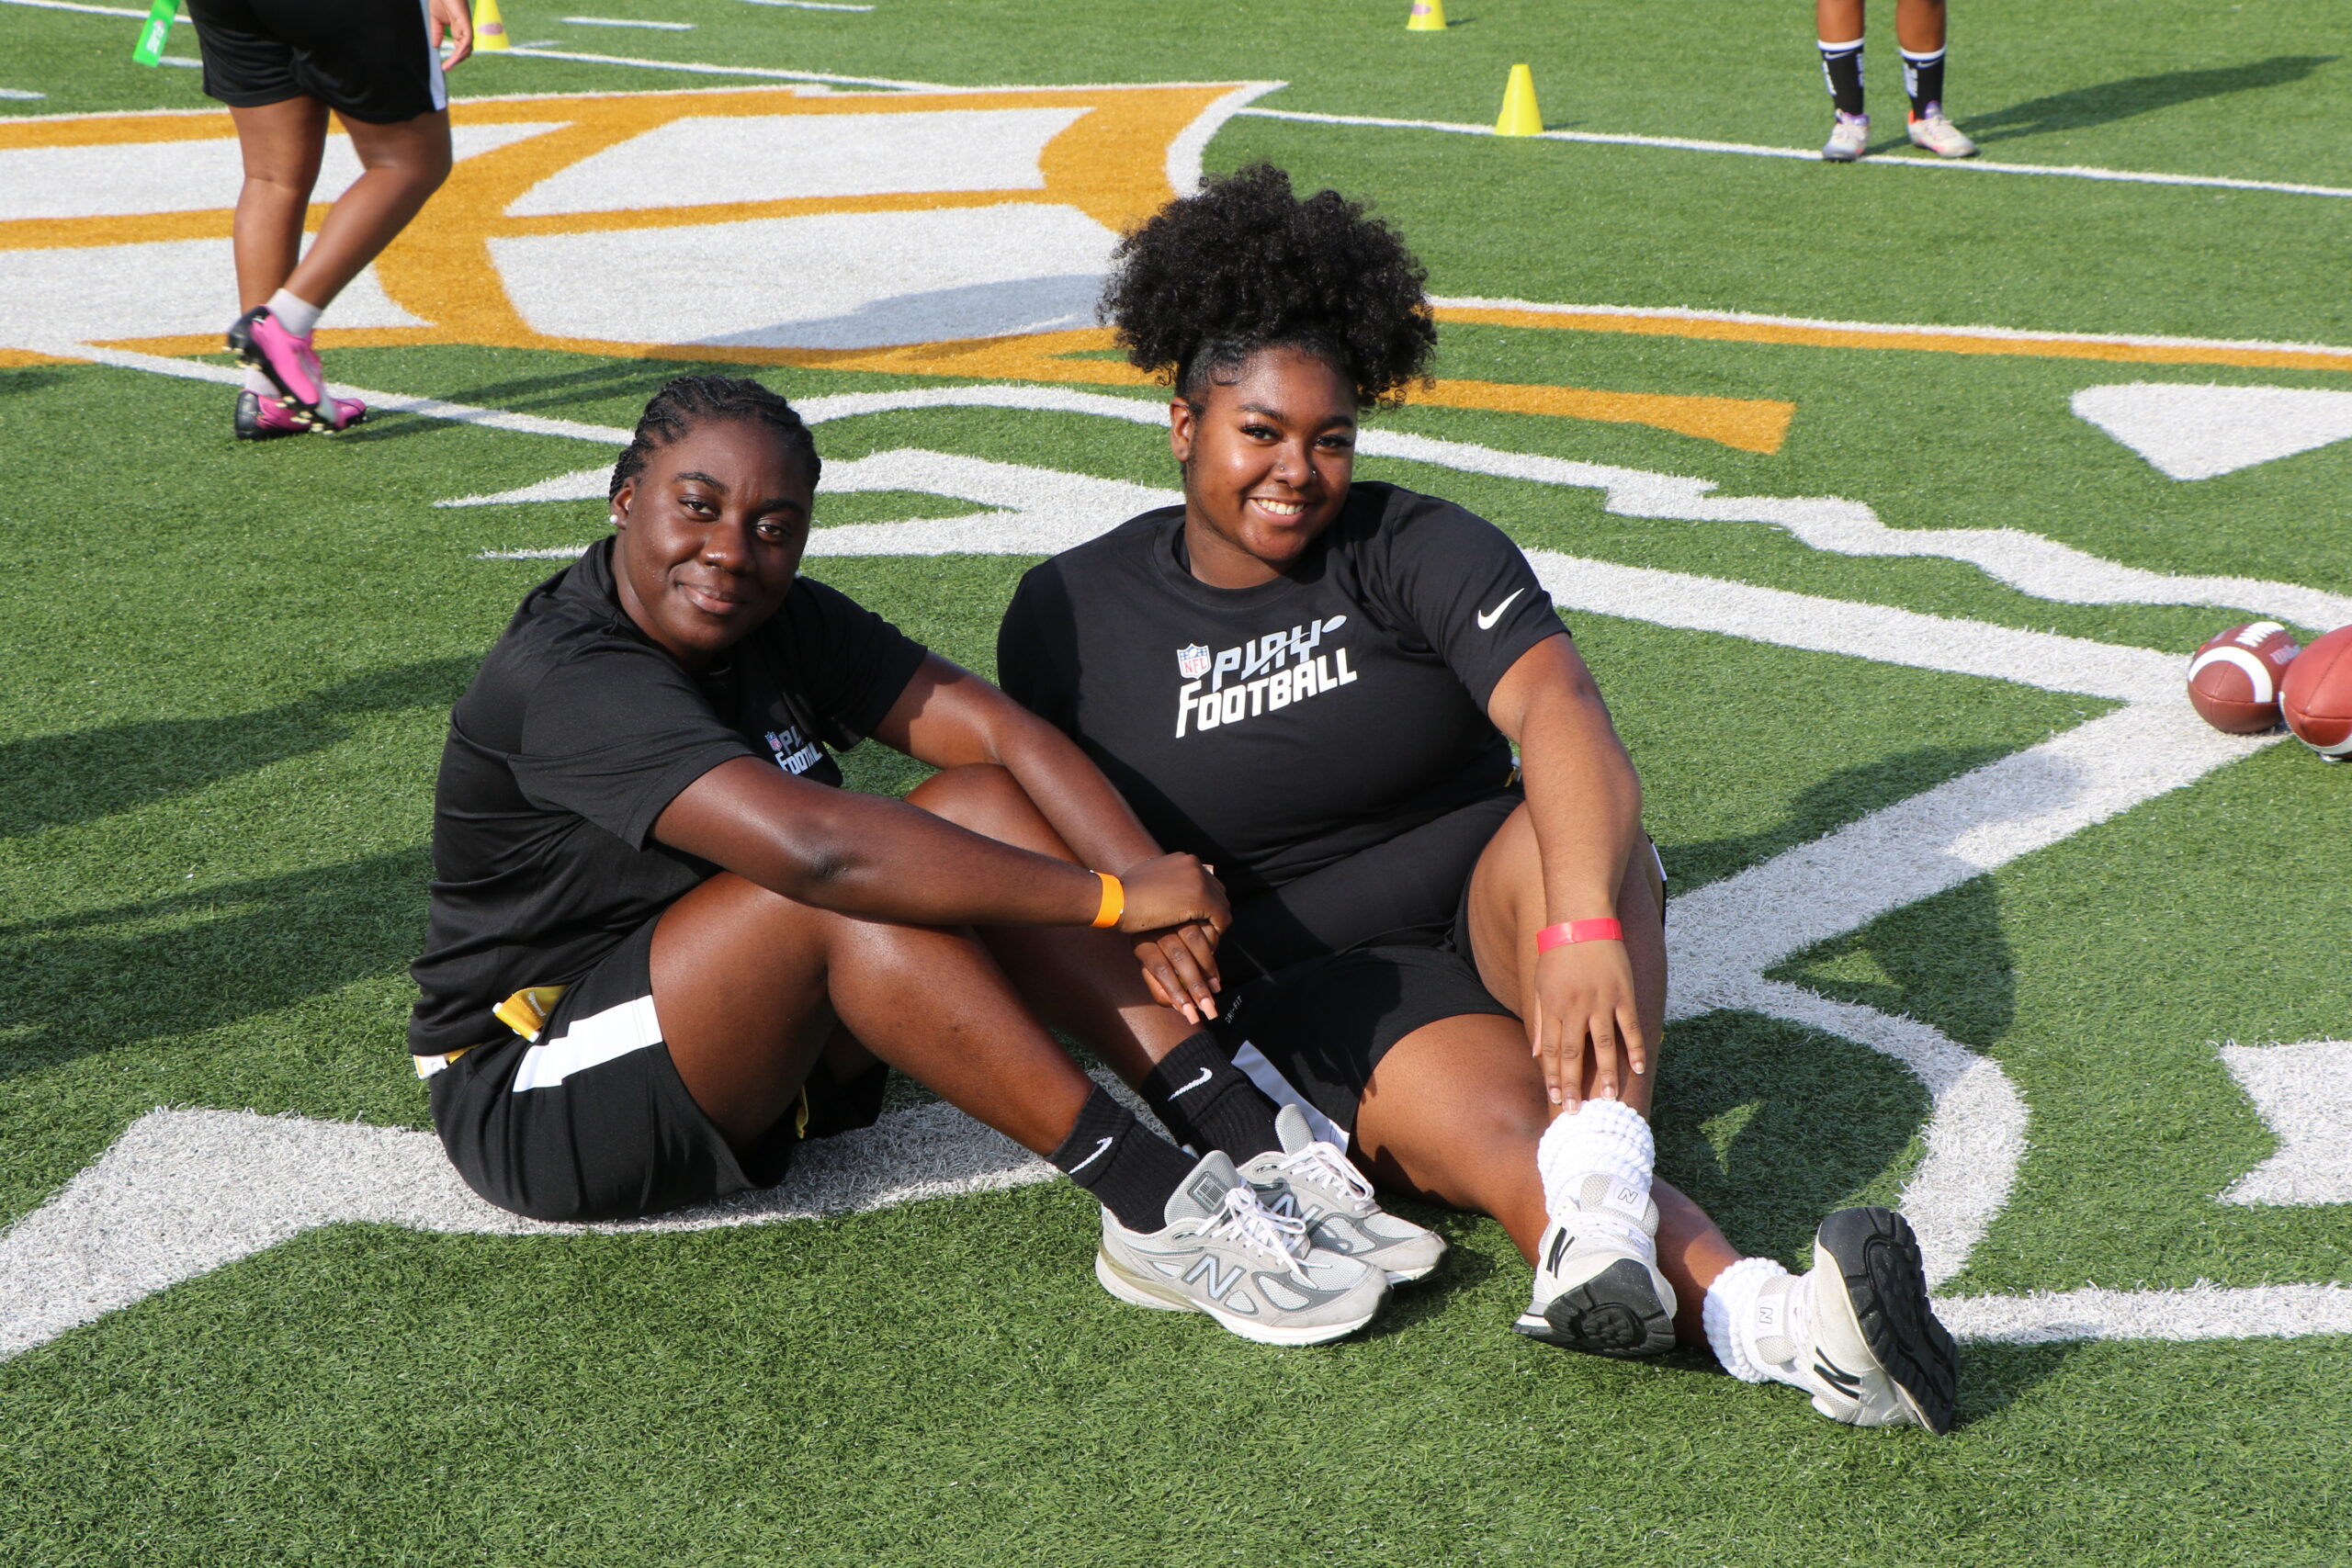 Girls on the Gridiron: HBCUs and the future of flag football